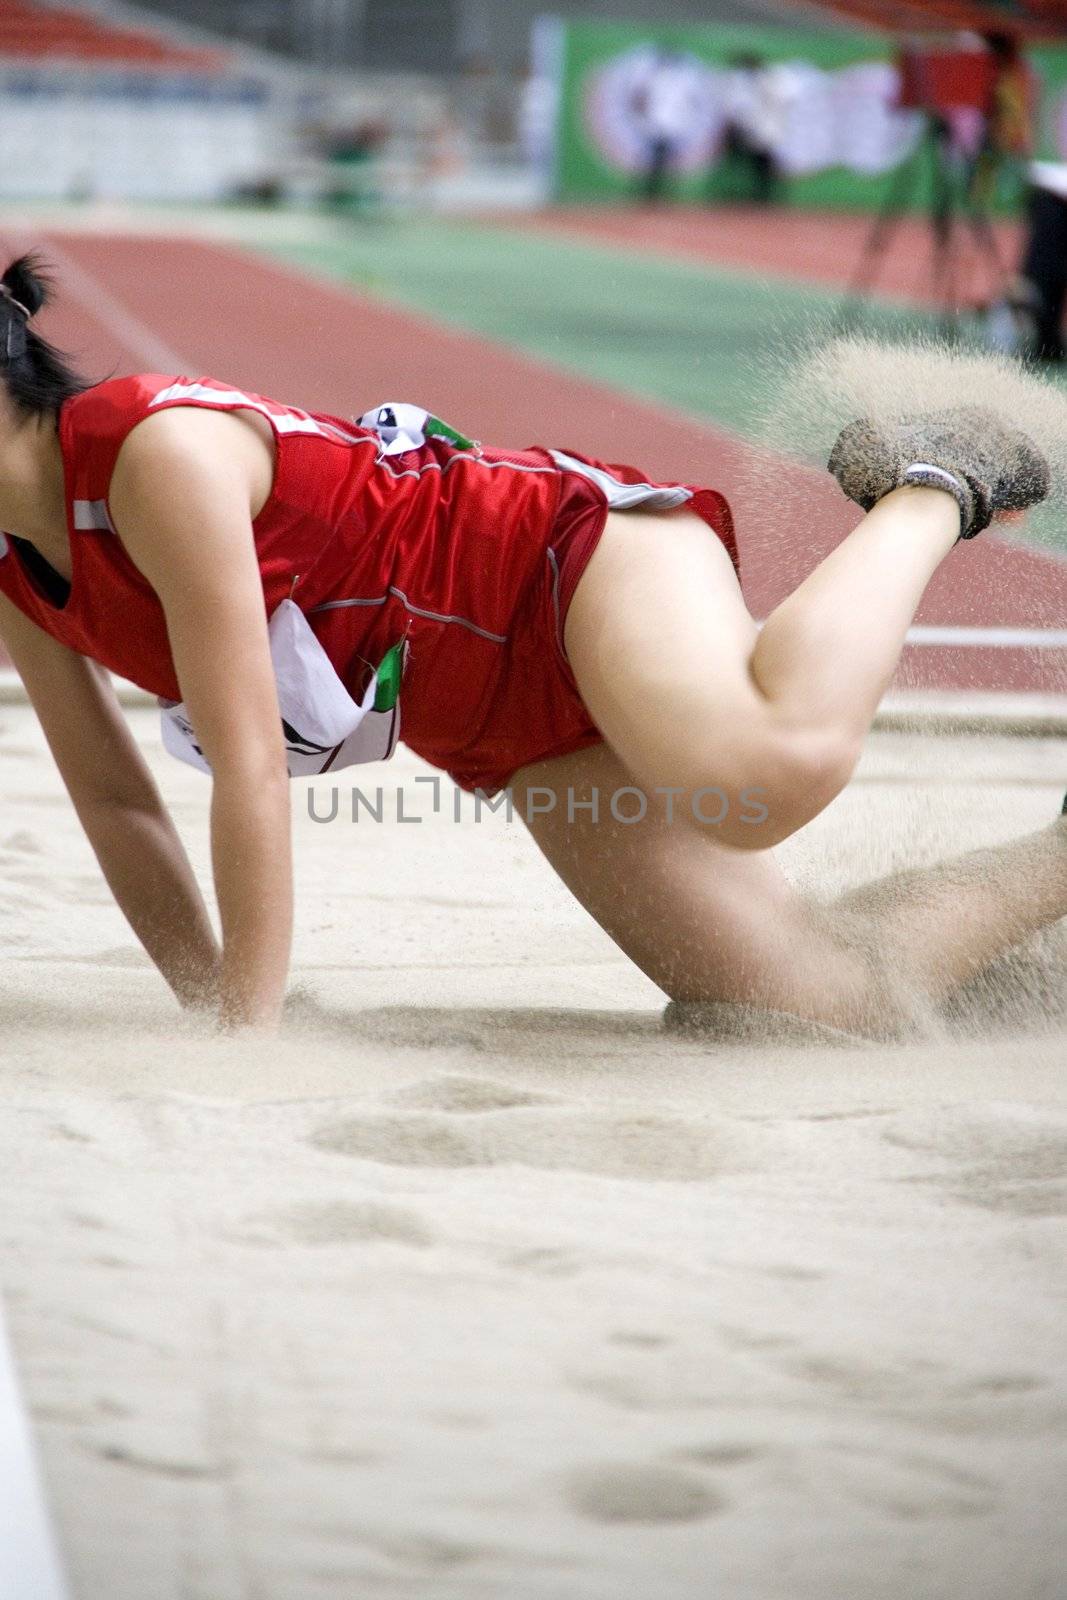 Image of a long jumper in action.